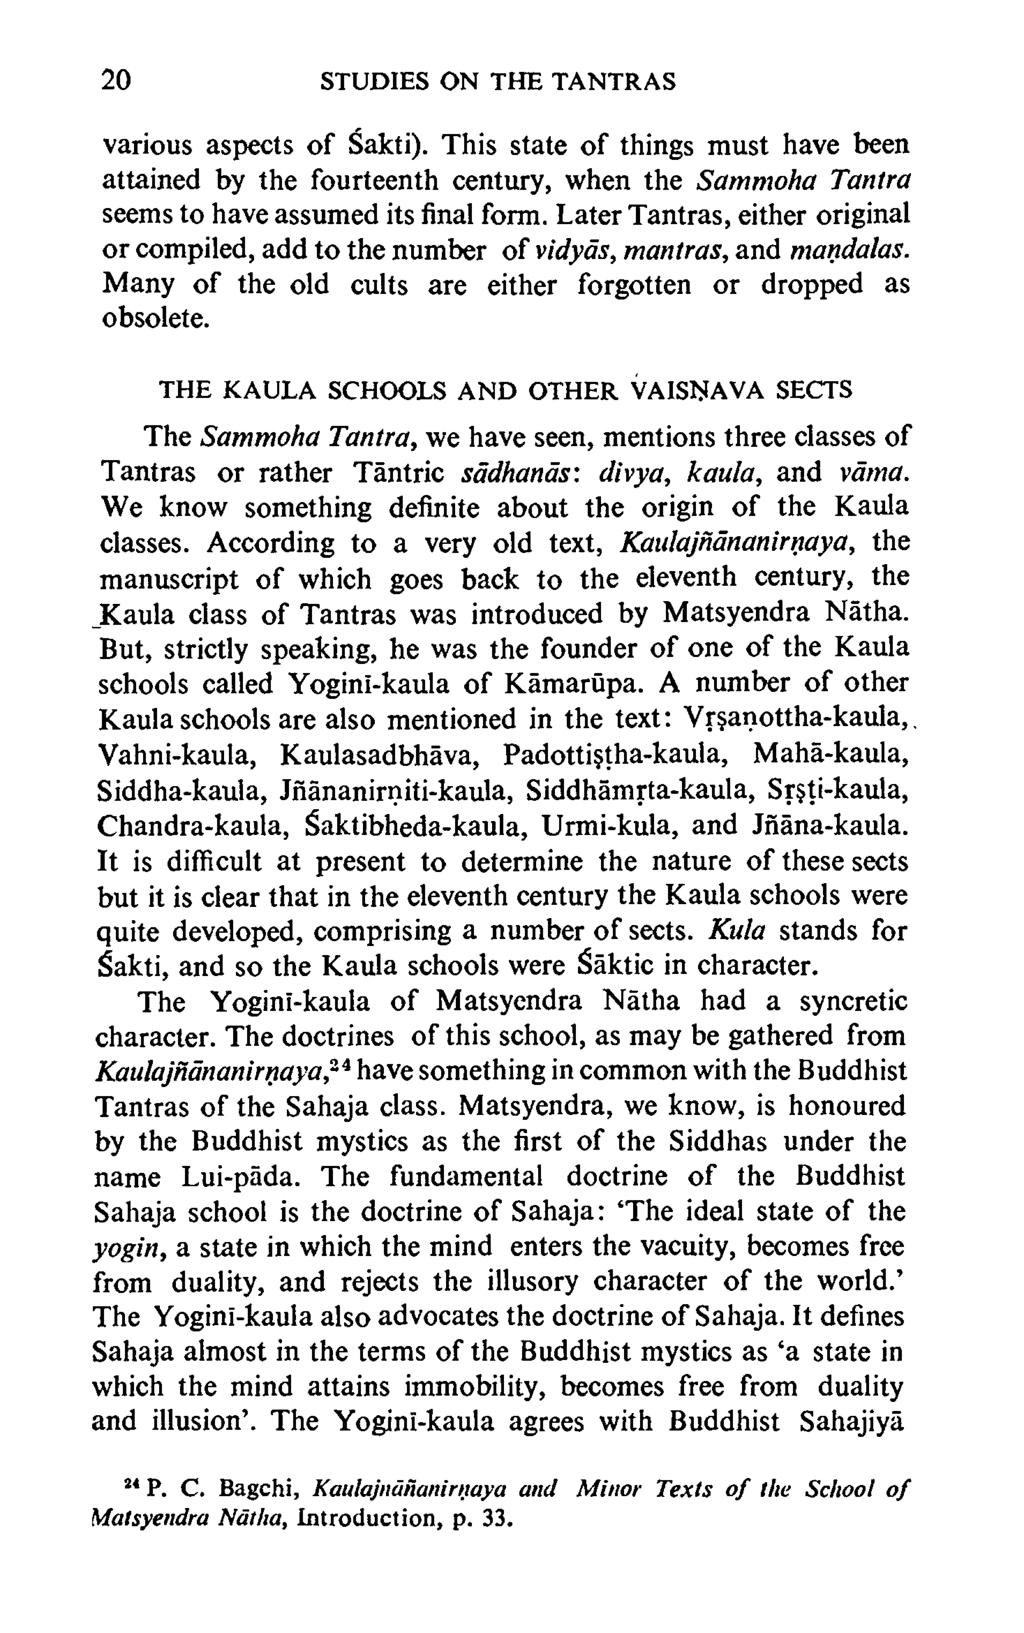 20 STUDIES ON THE TANTRAS various aspects of Sakti). This state of things must have been attained by the fourteenth century, when the Sammoha Tantra seems to have assumed its final form.